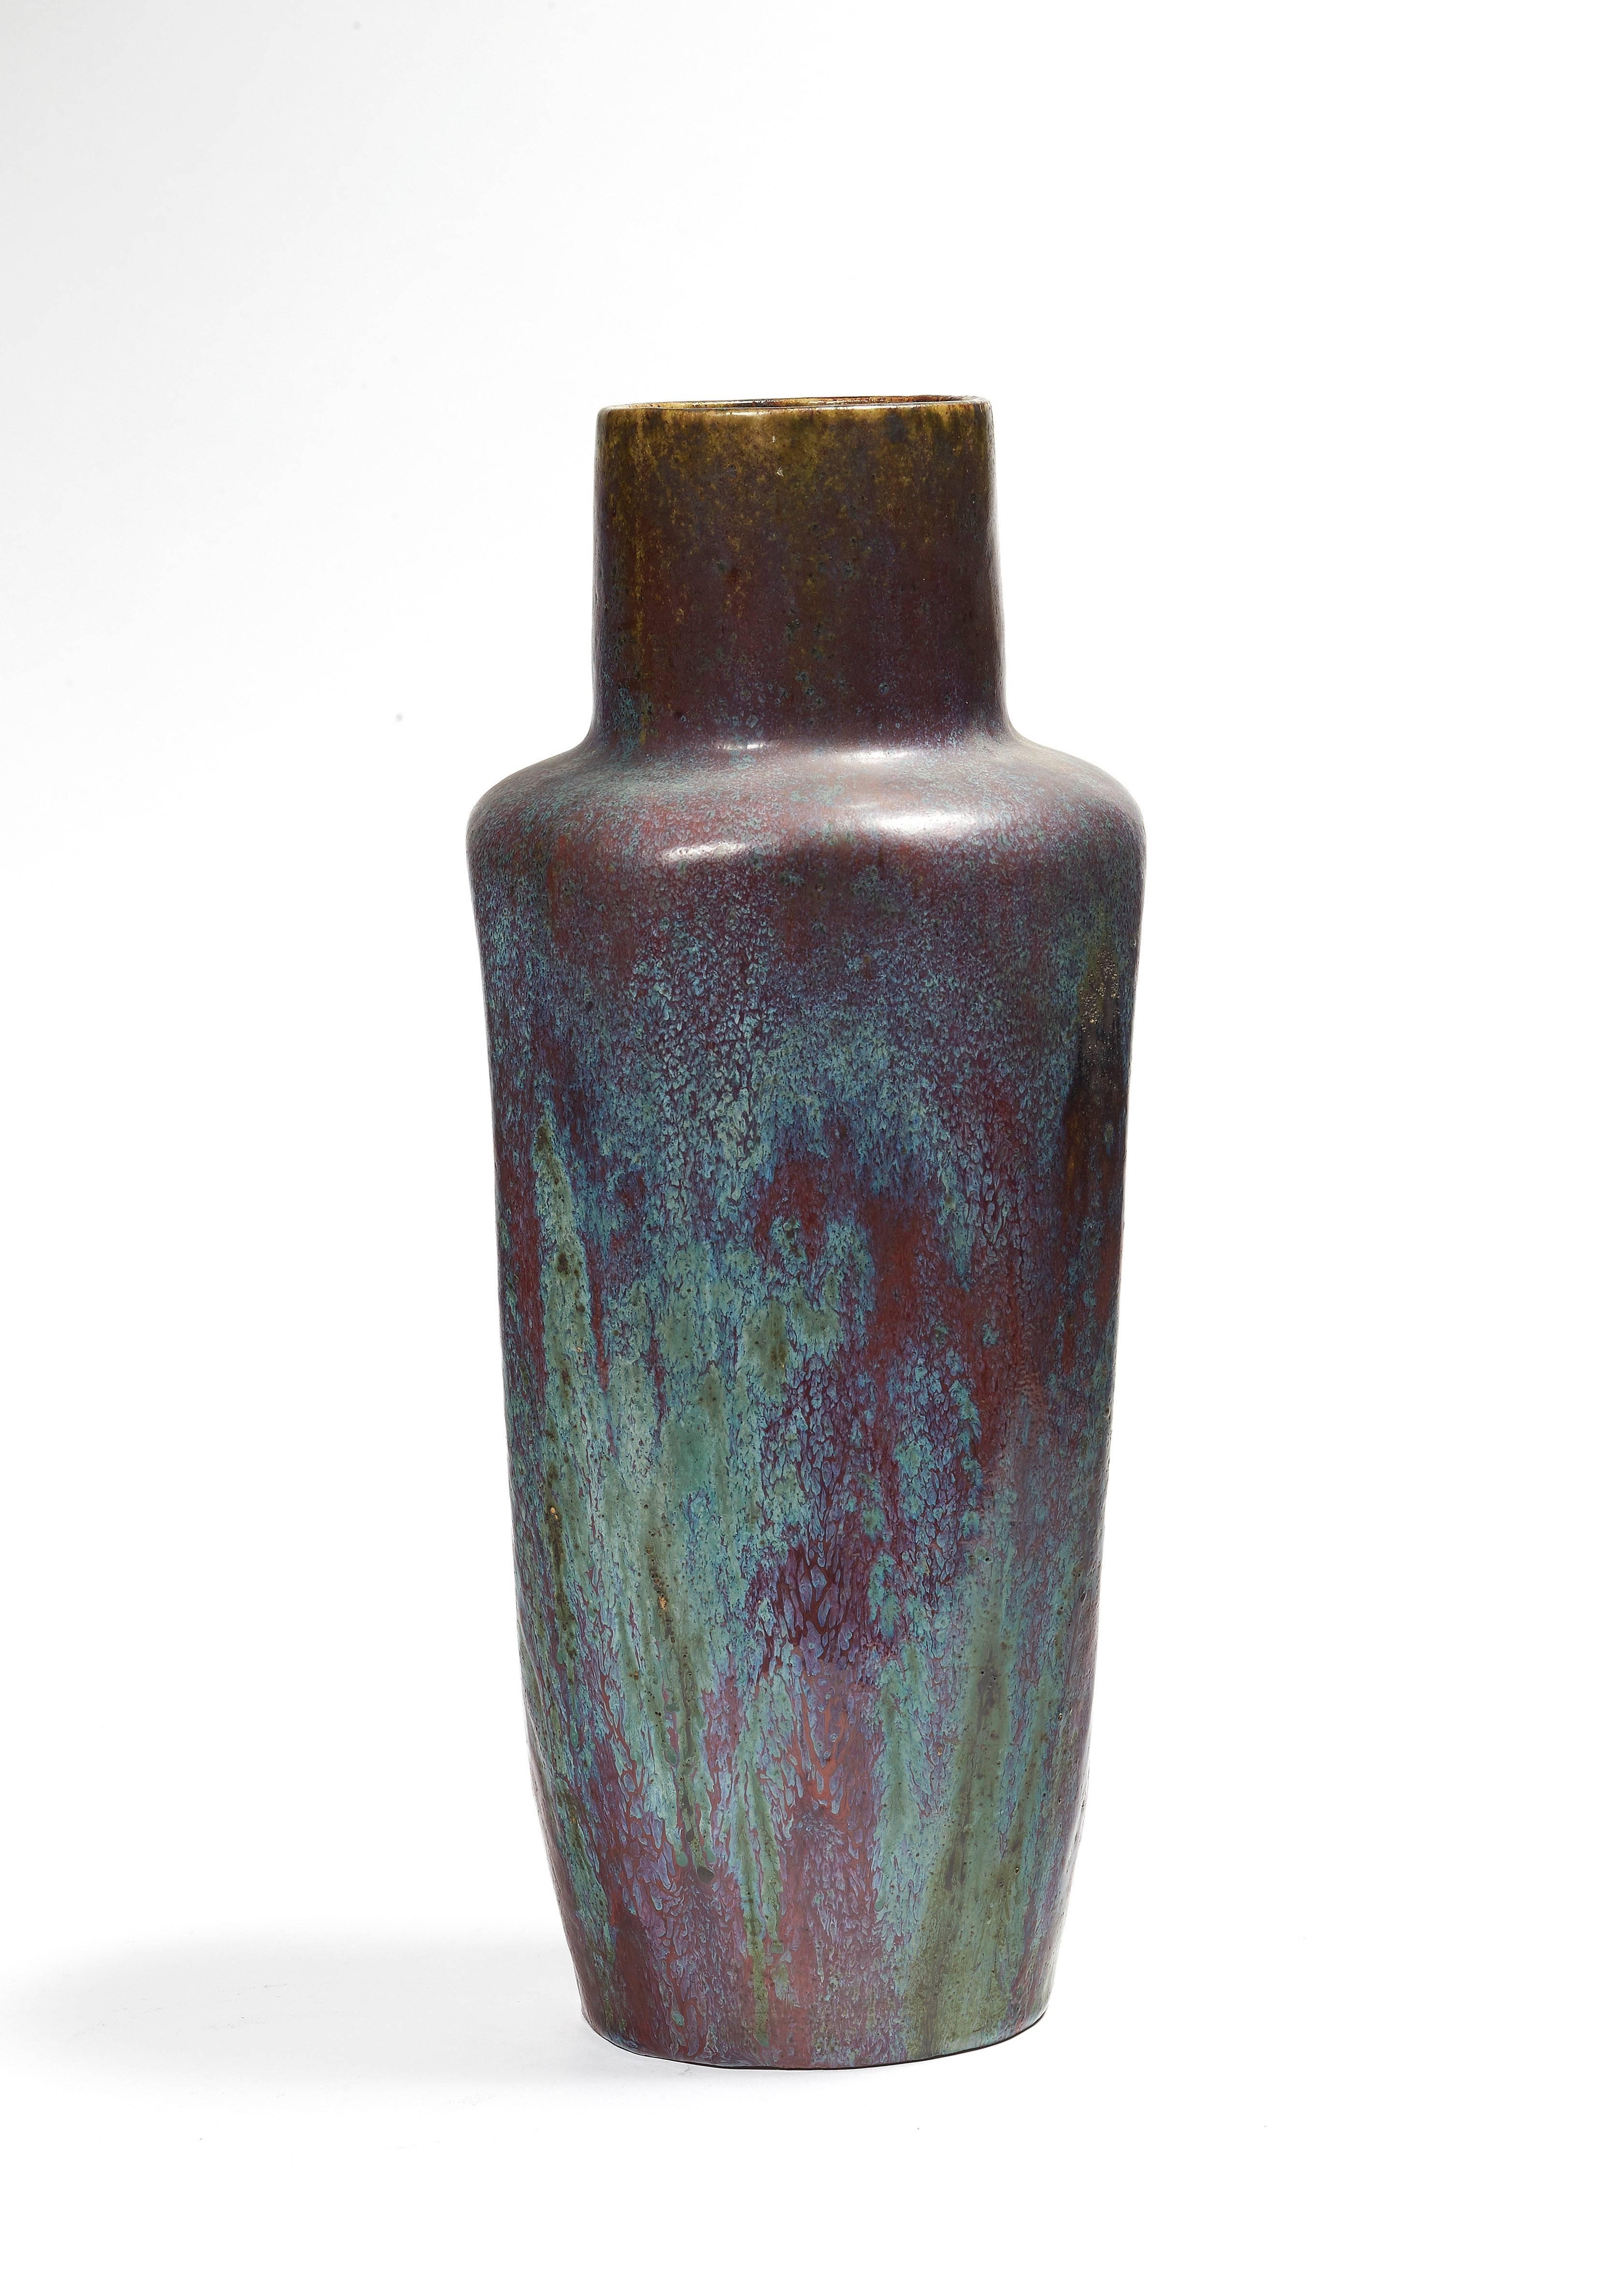 Sandstone vase with conical body and high neck, red enamel mottled blue. Signed, stamped and numbered 101.